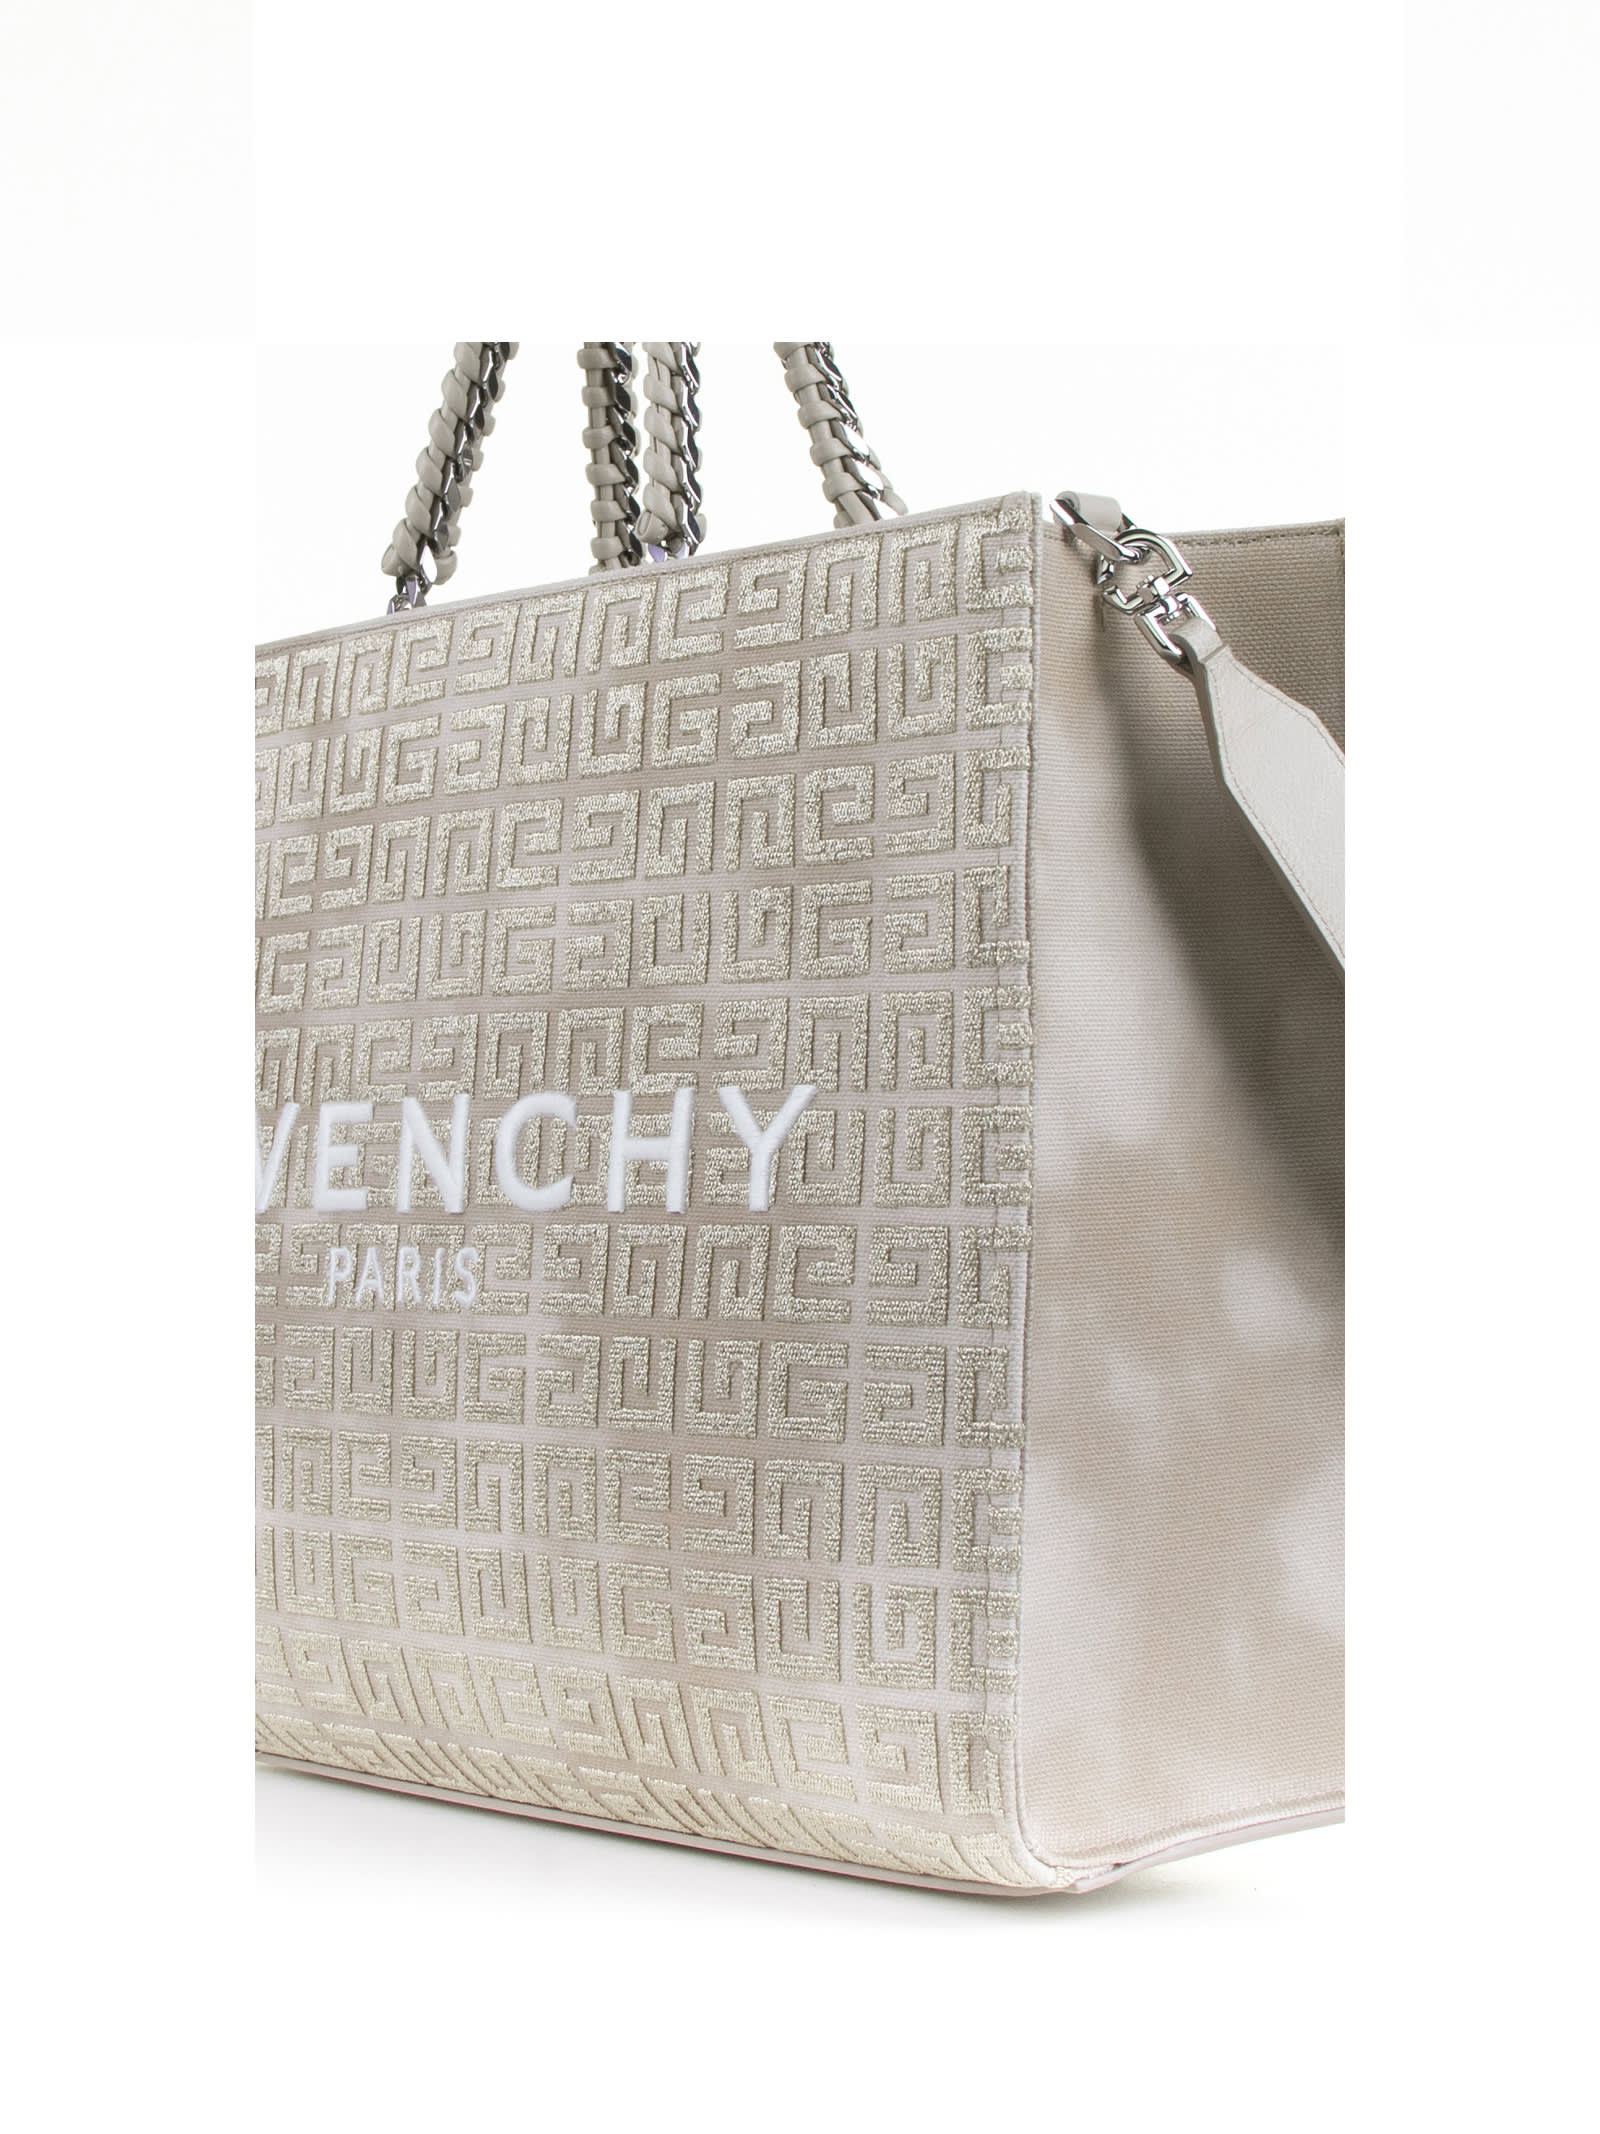 Shop Givenchy Tote In Dusty Gold